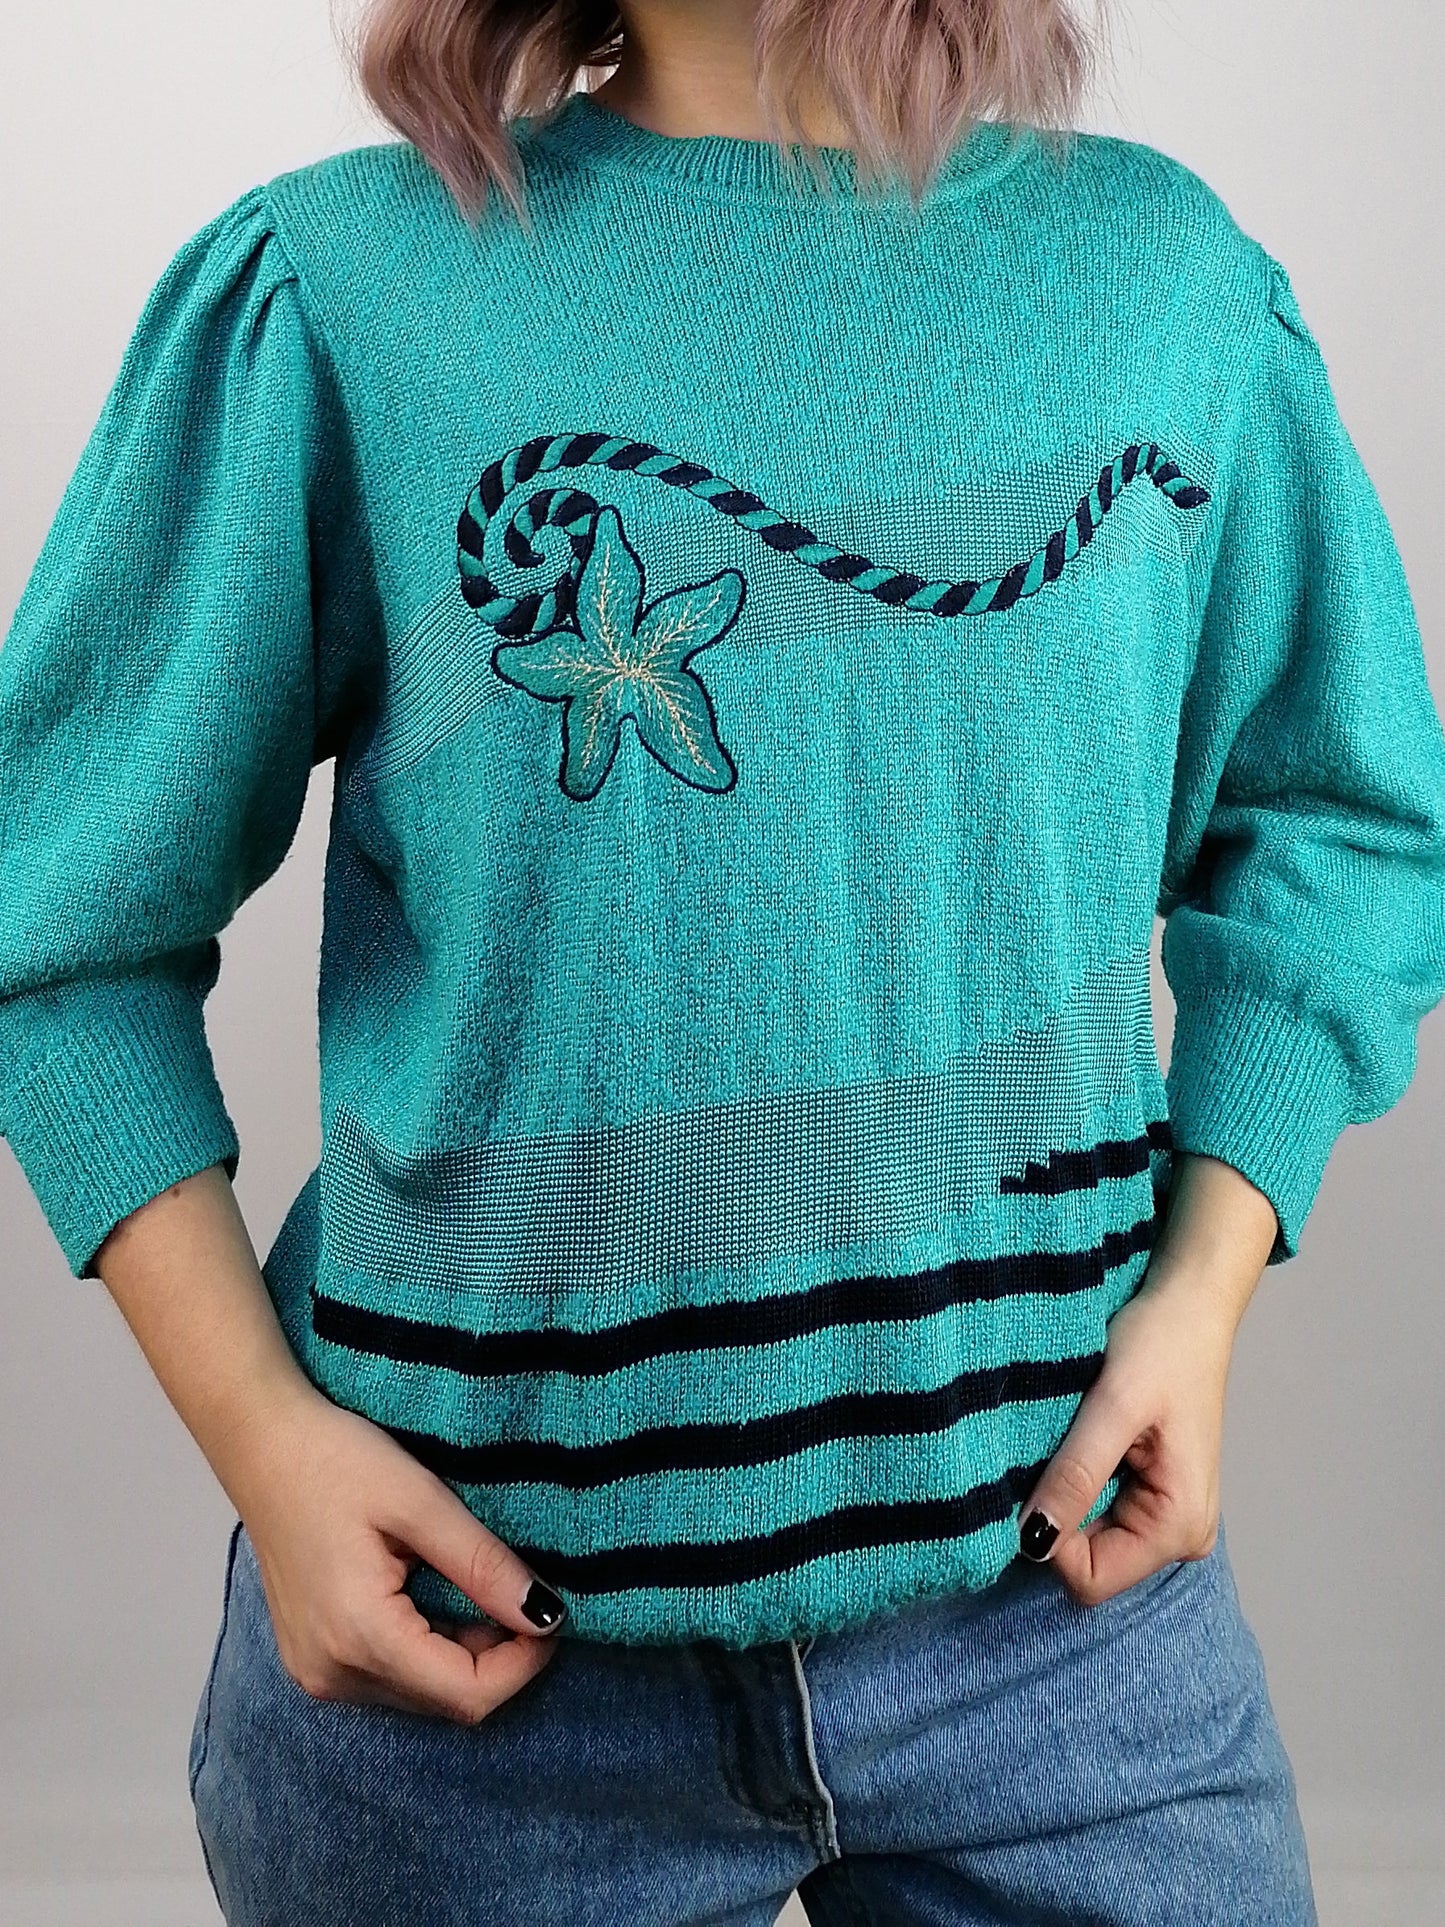 Vintage 80's Embroidery Knit Turquoise Retro Sweater